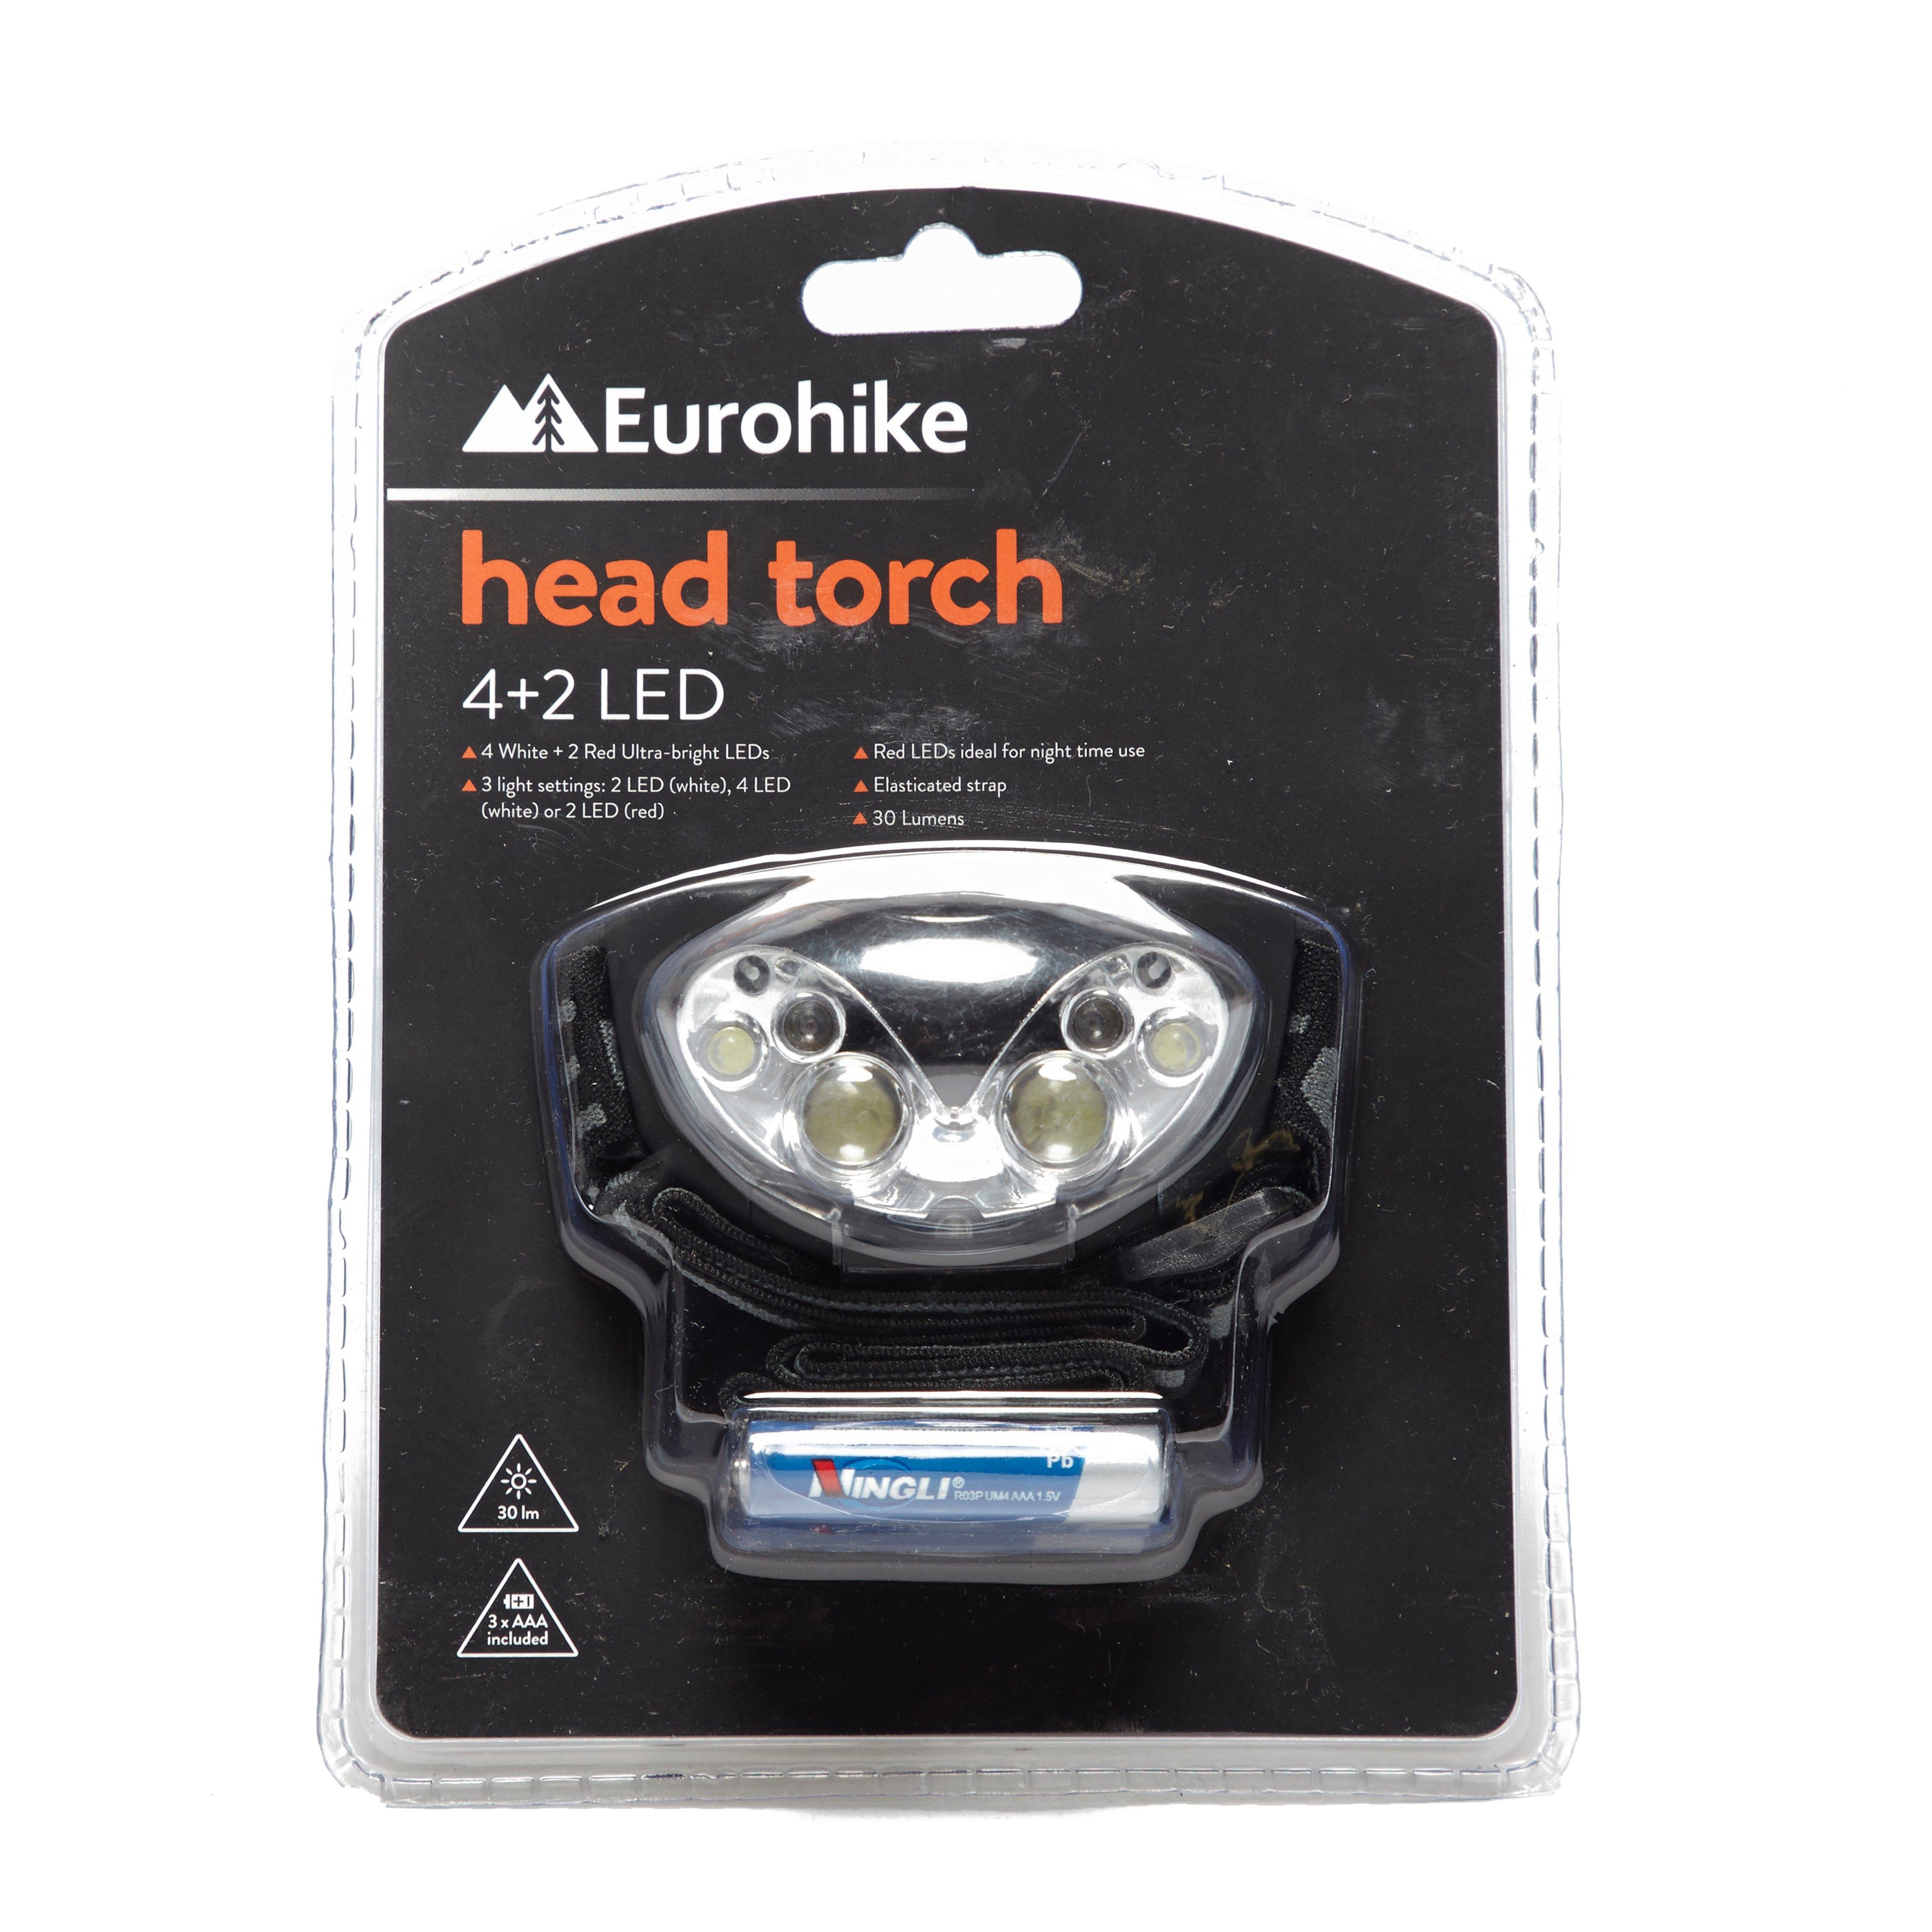 Eurohike EH 6 LED HEAD TORCH Review